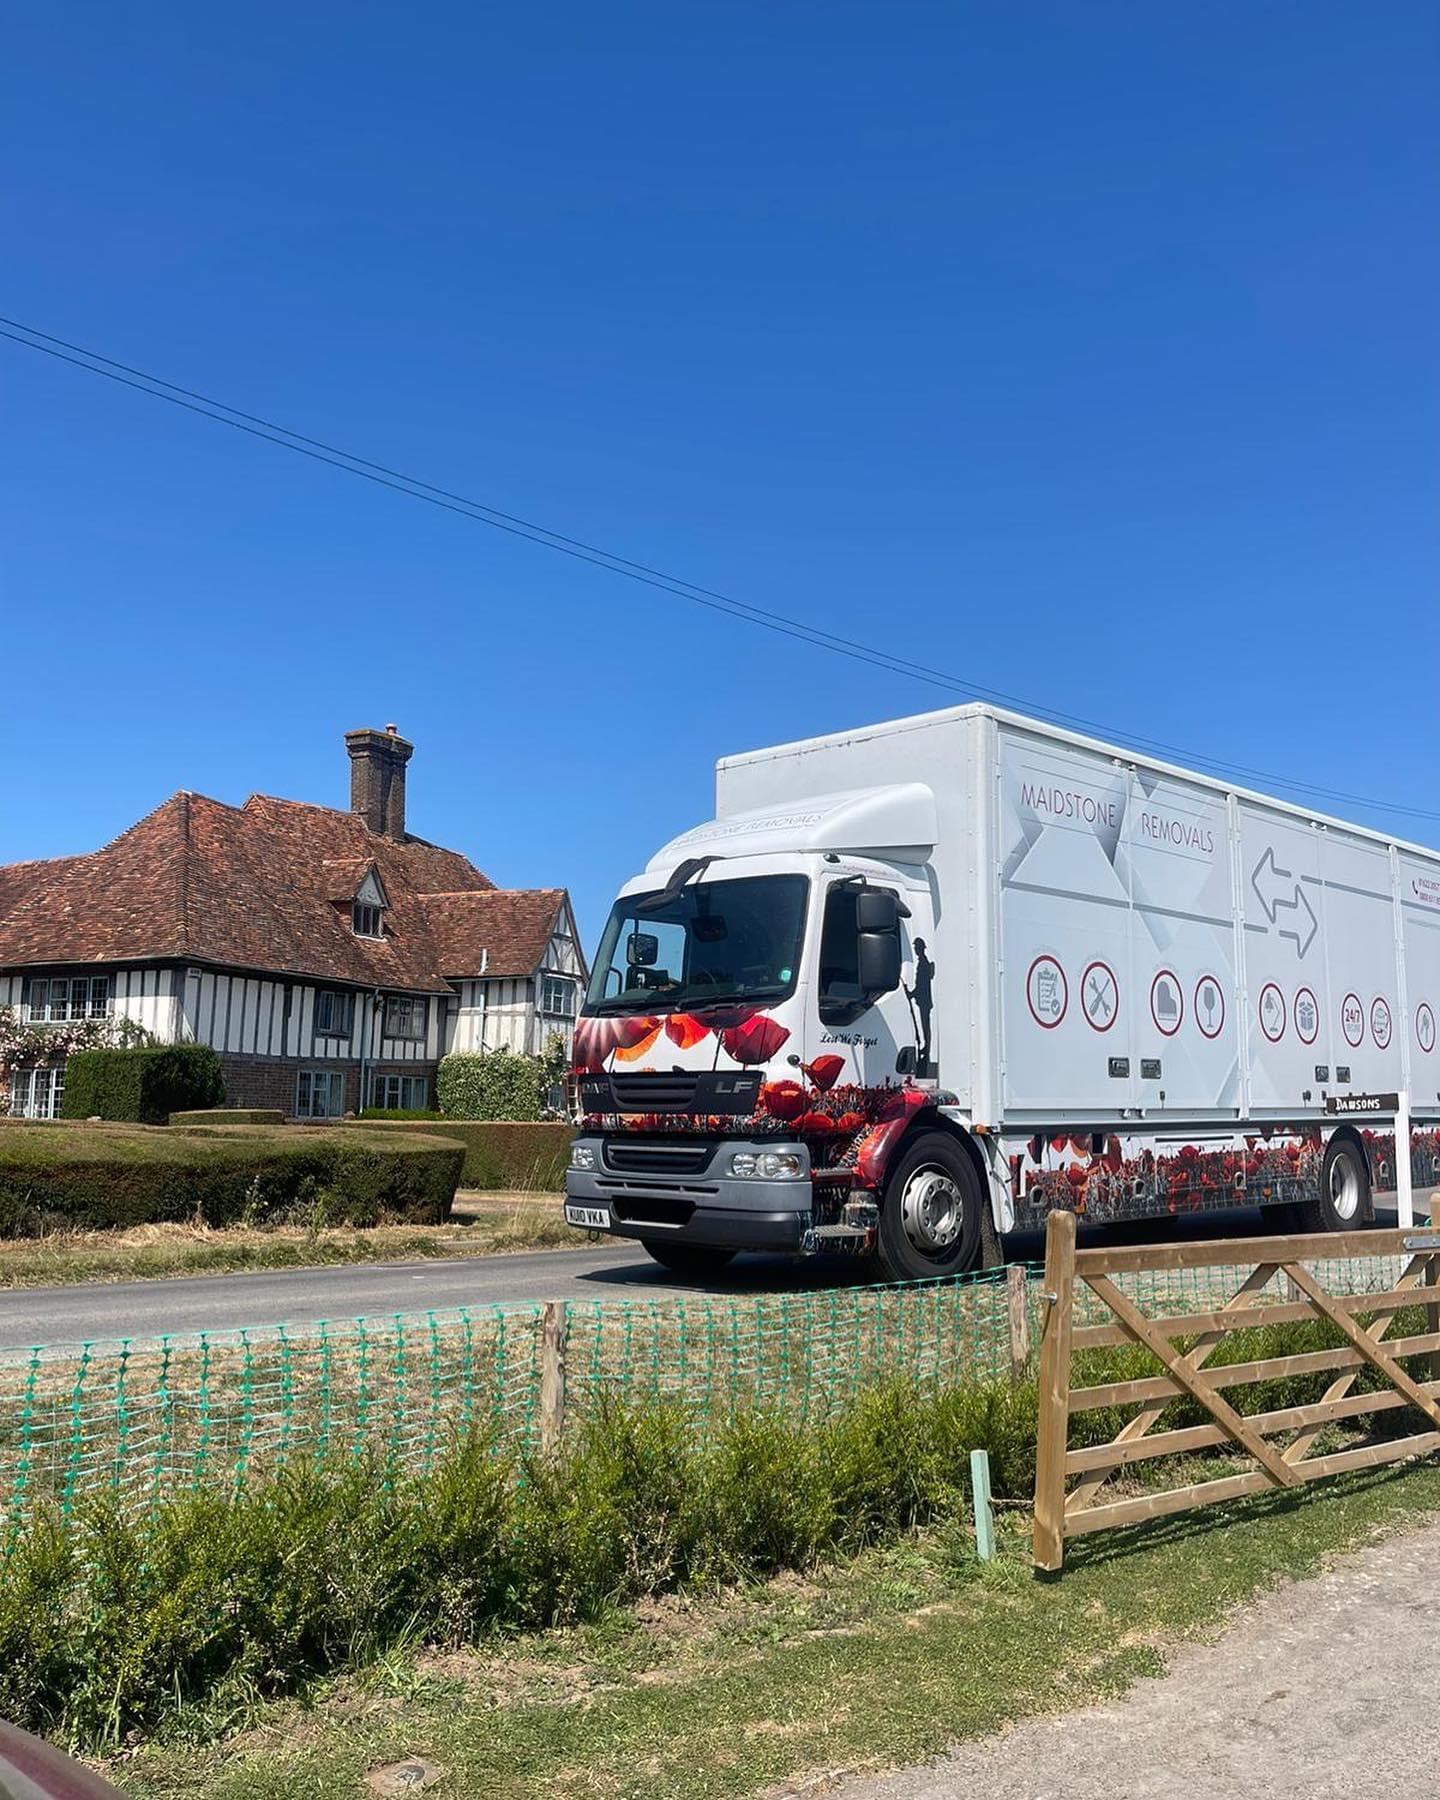 Maidstone Removals is the best local removal company in Sevenoaks, Kent. Contact us for more information.